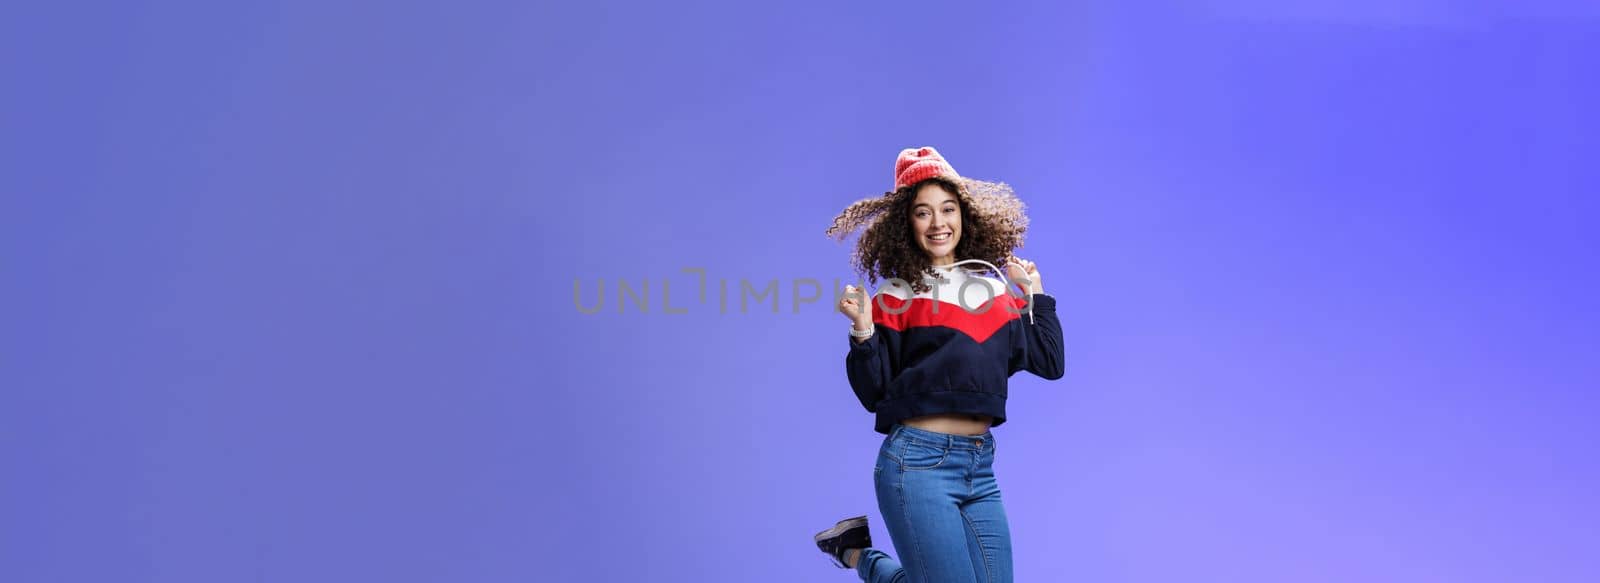 Lifestyle. Delighted carefree and happy young woman with curly hair in warm beanie jumping joyfully having fun raising hands and smiling broadly posing over blue background in outdoor clothes.